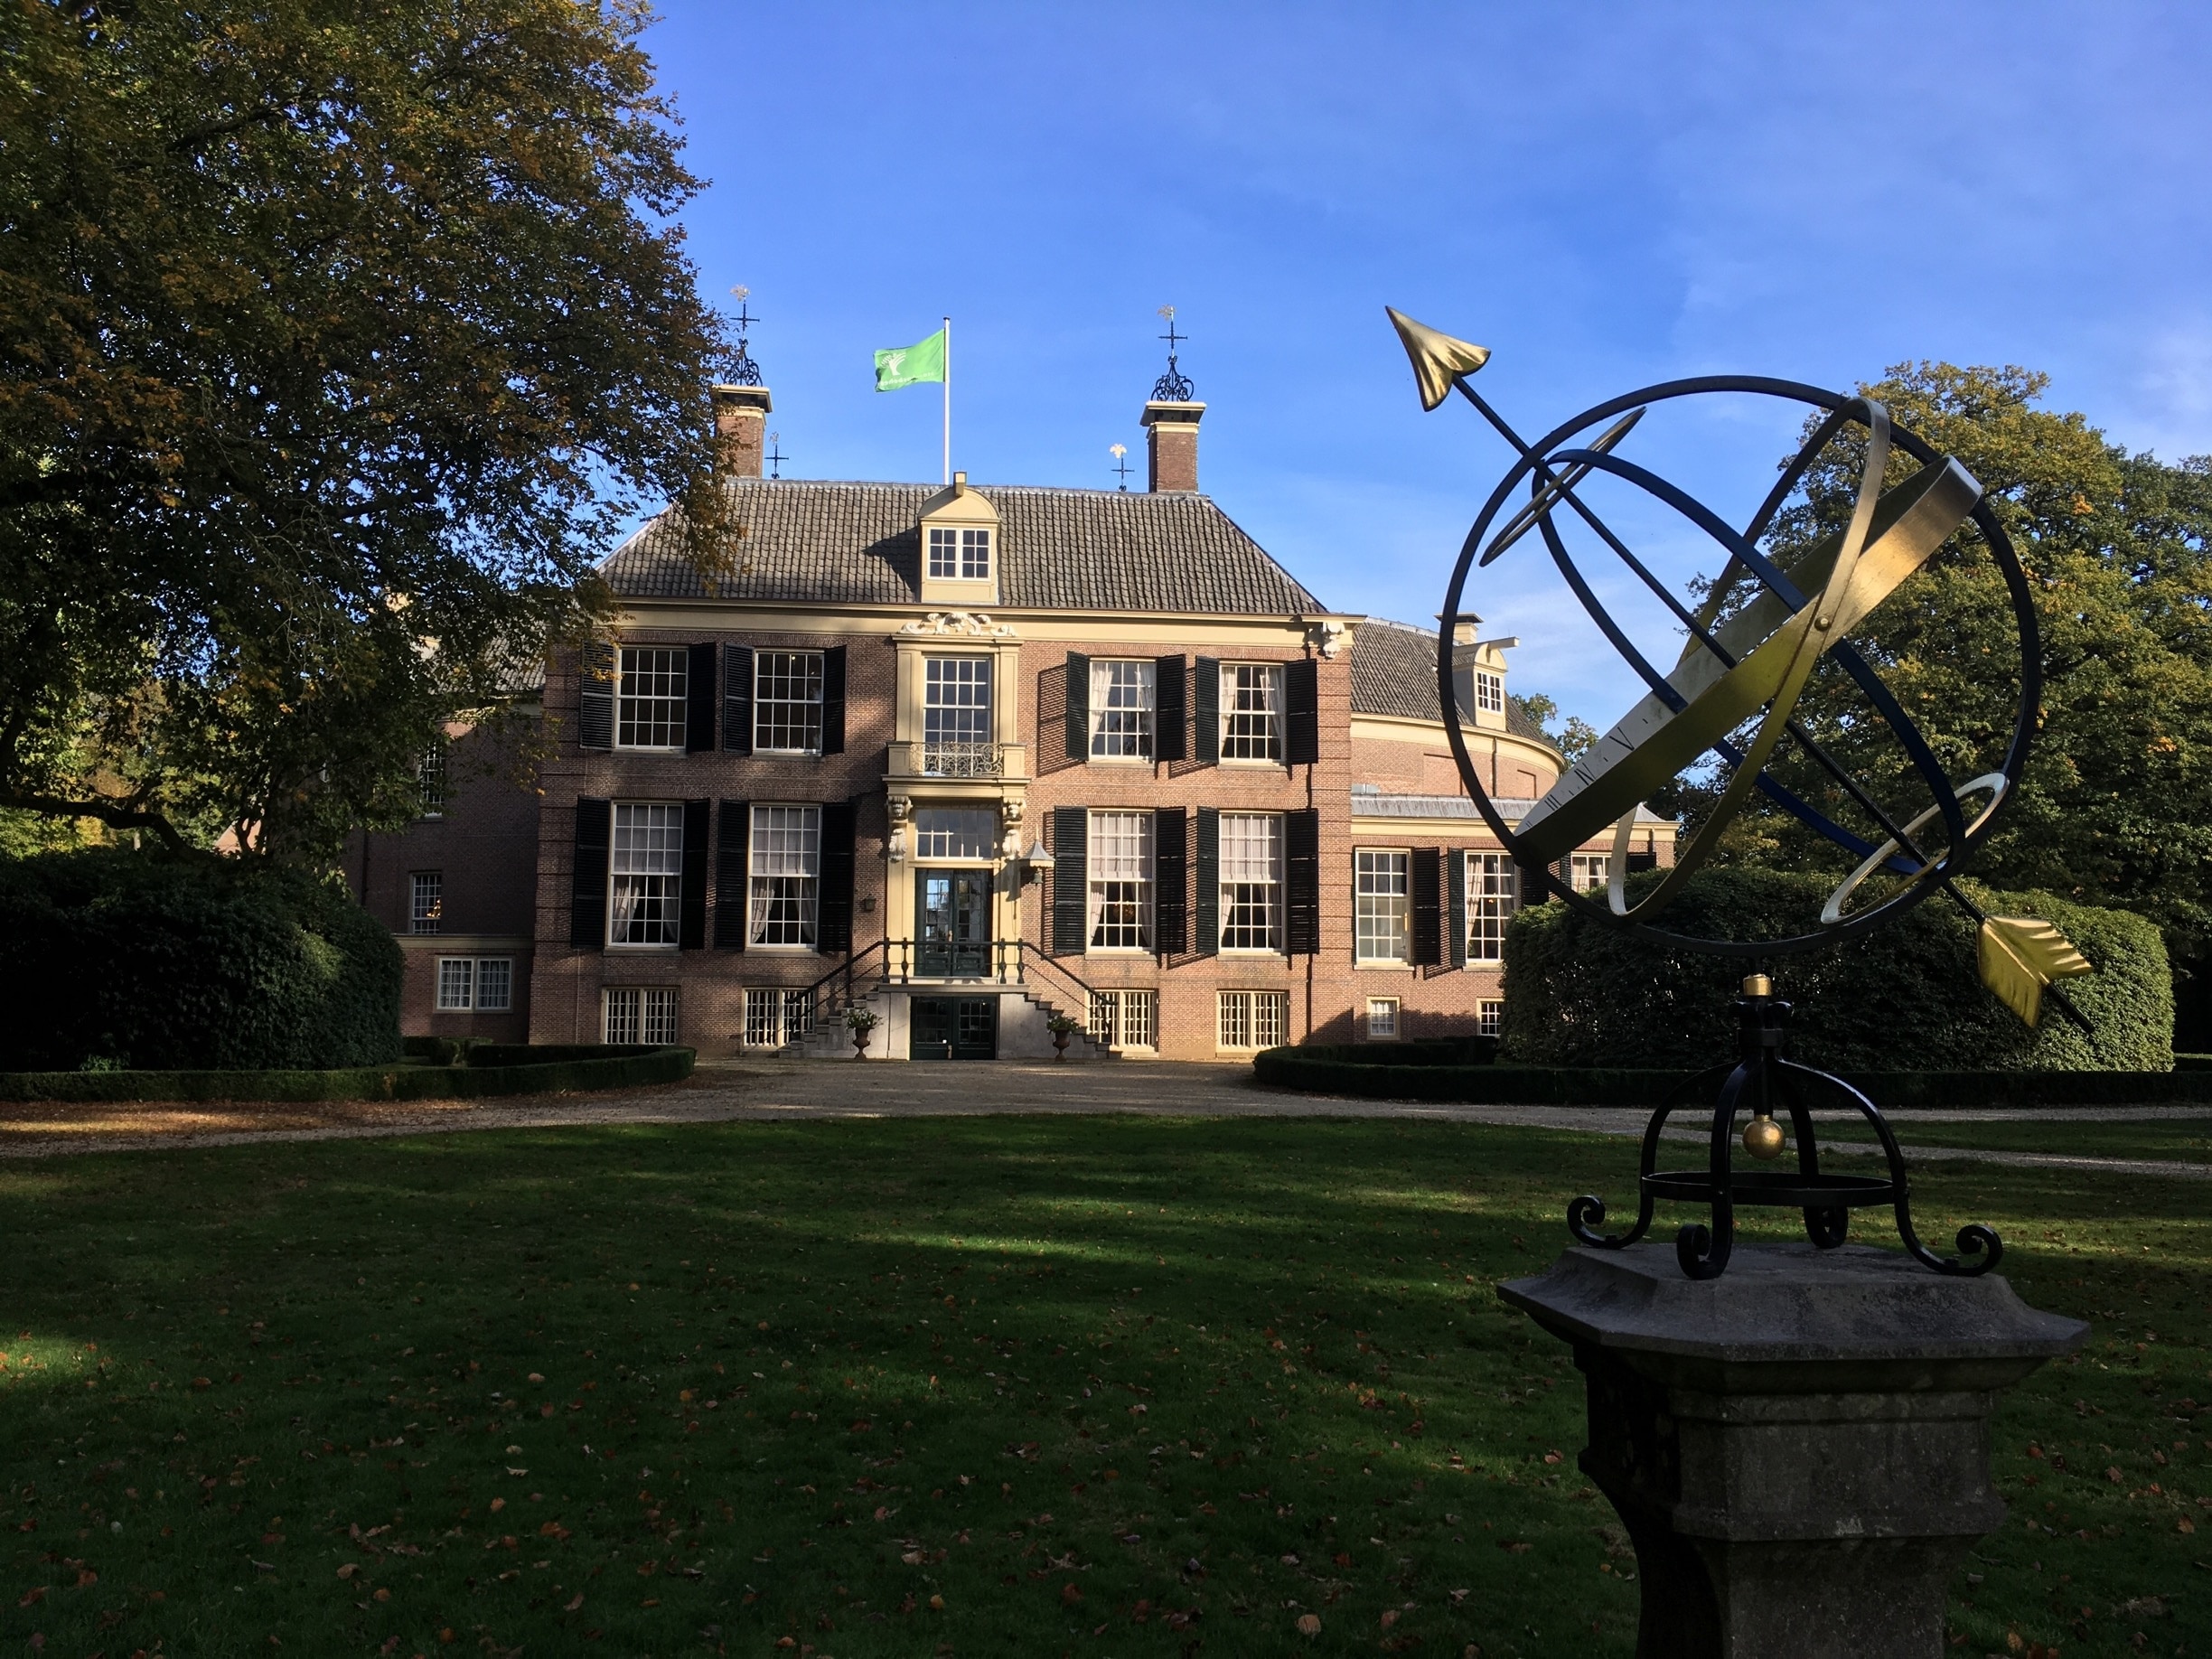 No towers and just a small moat. But a great park and mansion, a sundial and a top (lunch) restaurant as well. 

https://kasteelgroeneveld.nl/